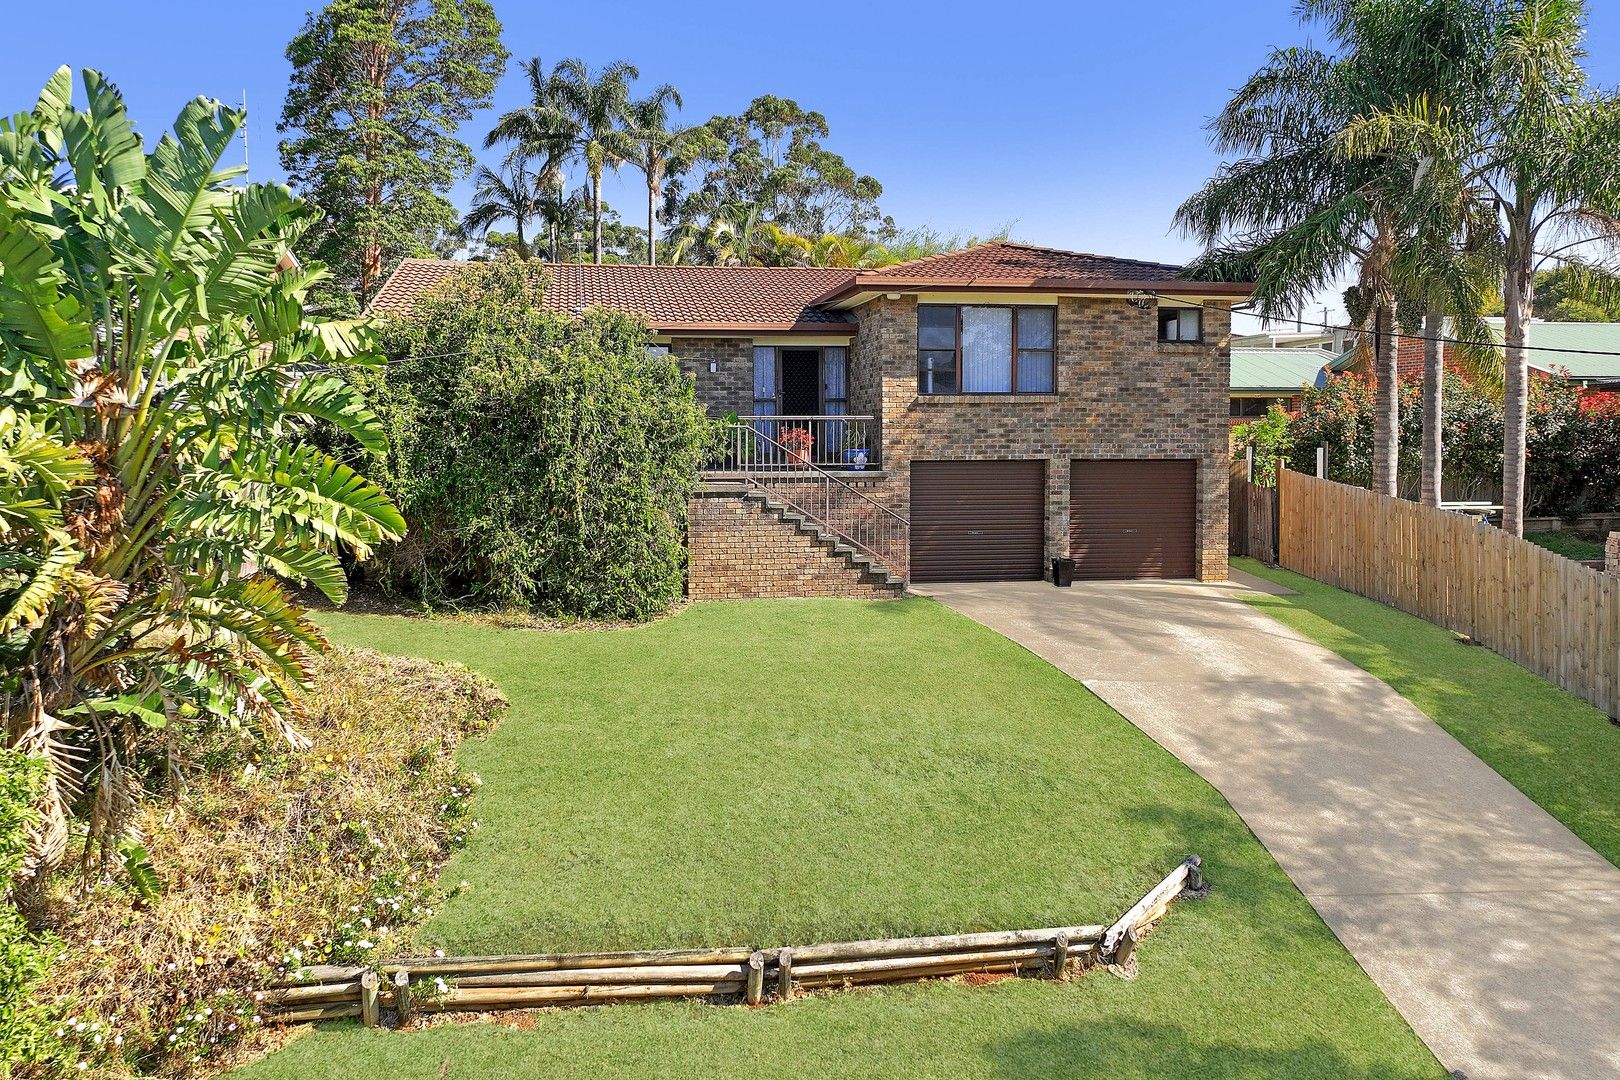 3 bedrooms House in 45 Treetops Crescent MOLLYMOOK BEACH NSW, 2539